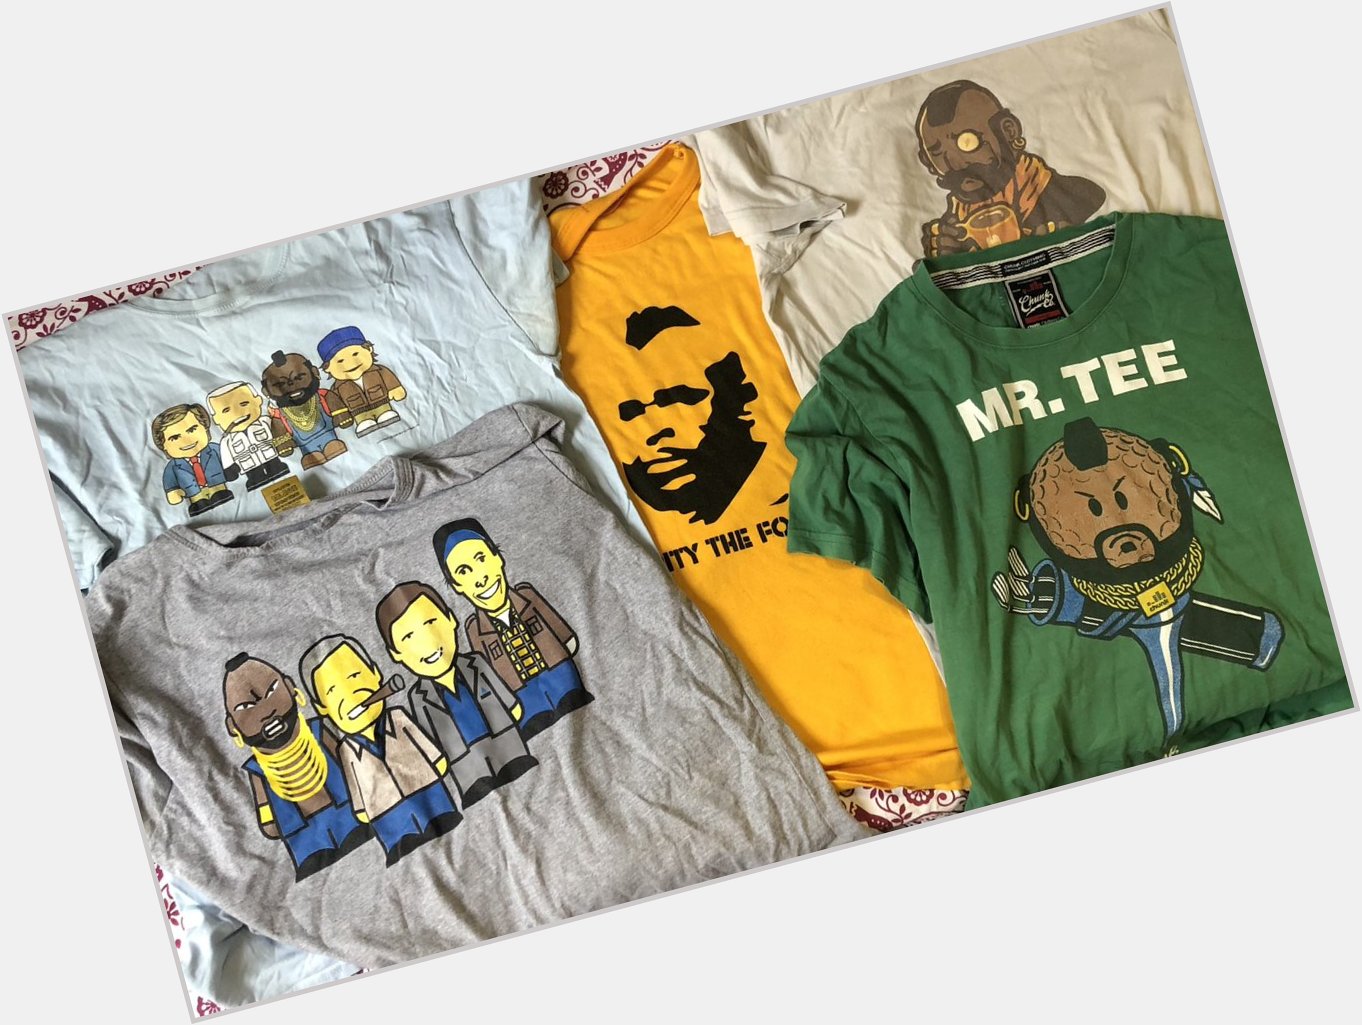 Happy 70th birthday this weekend to the man, the icon, the biggest single factor in my t-shirt collection Mr T. 